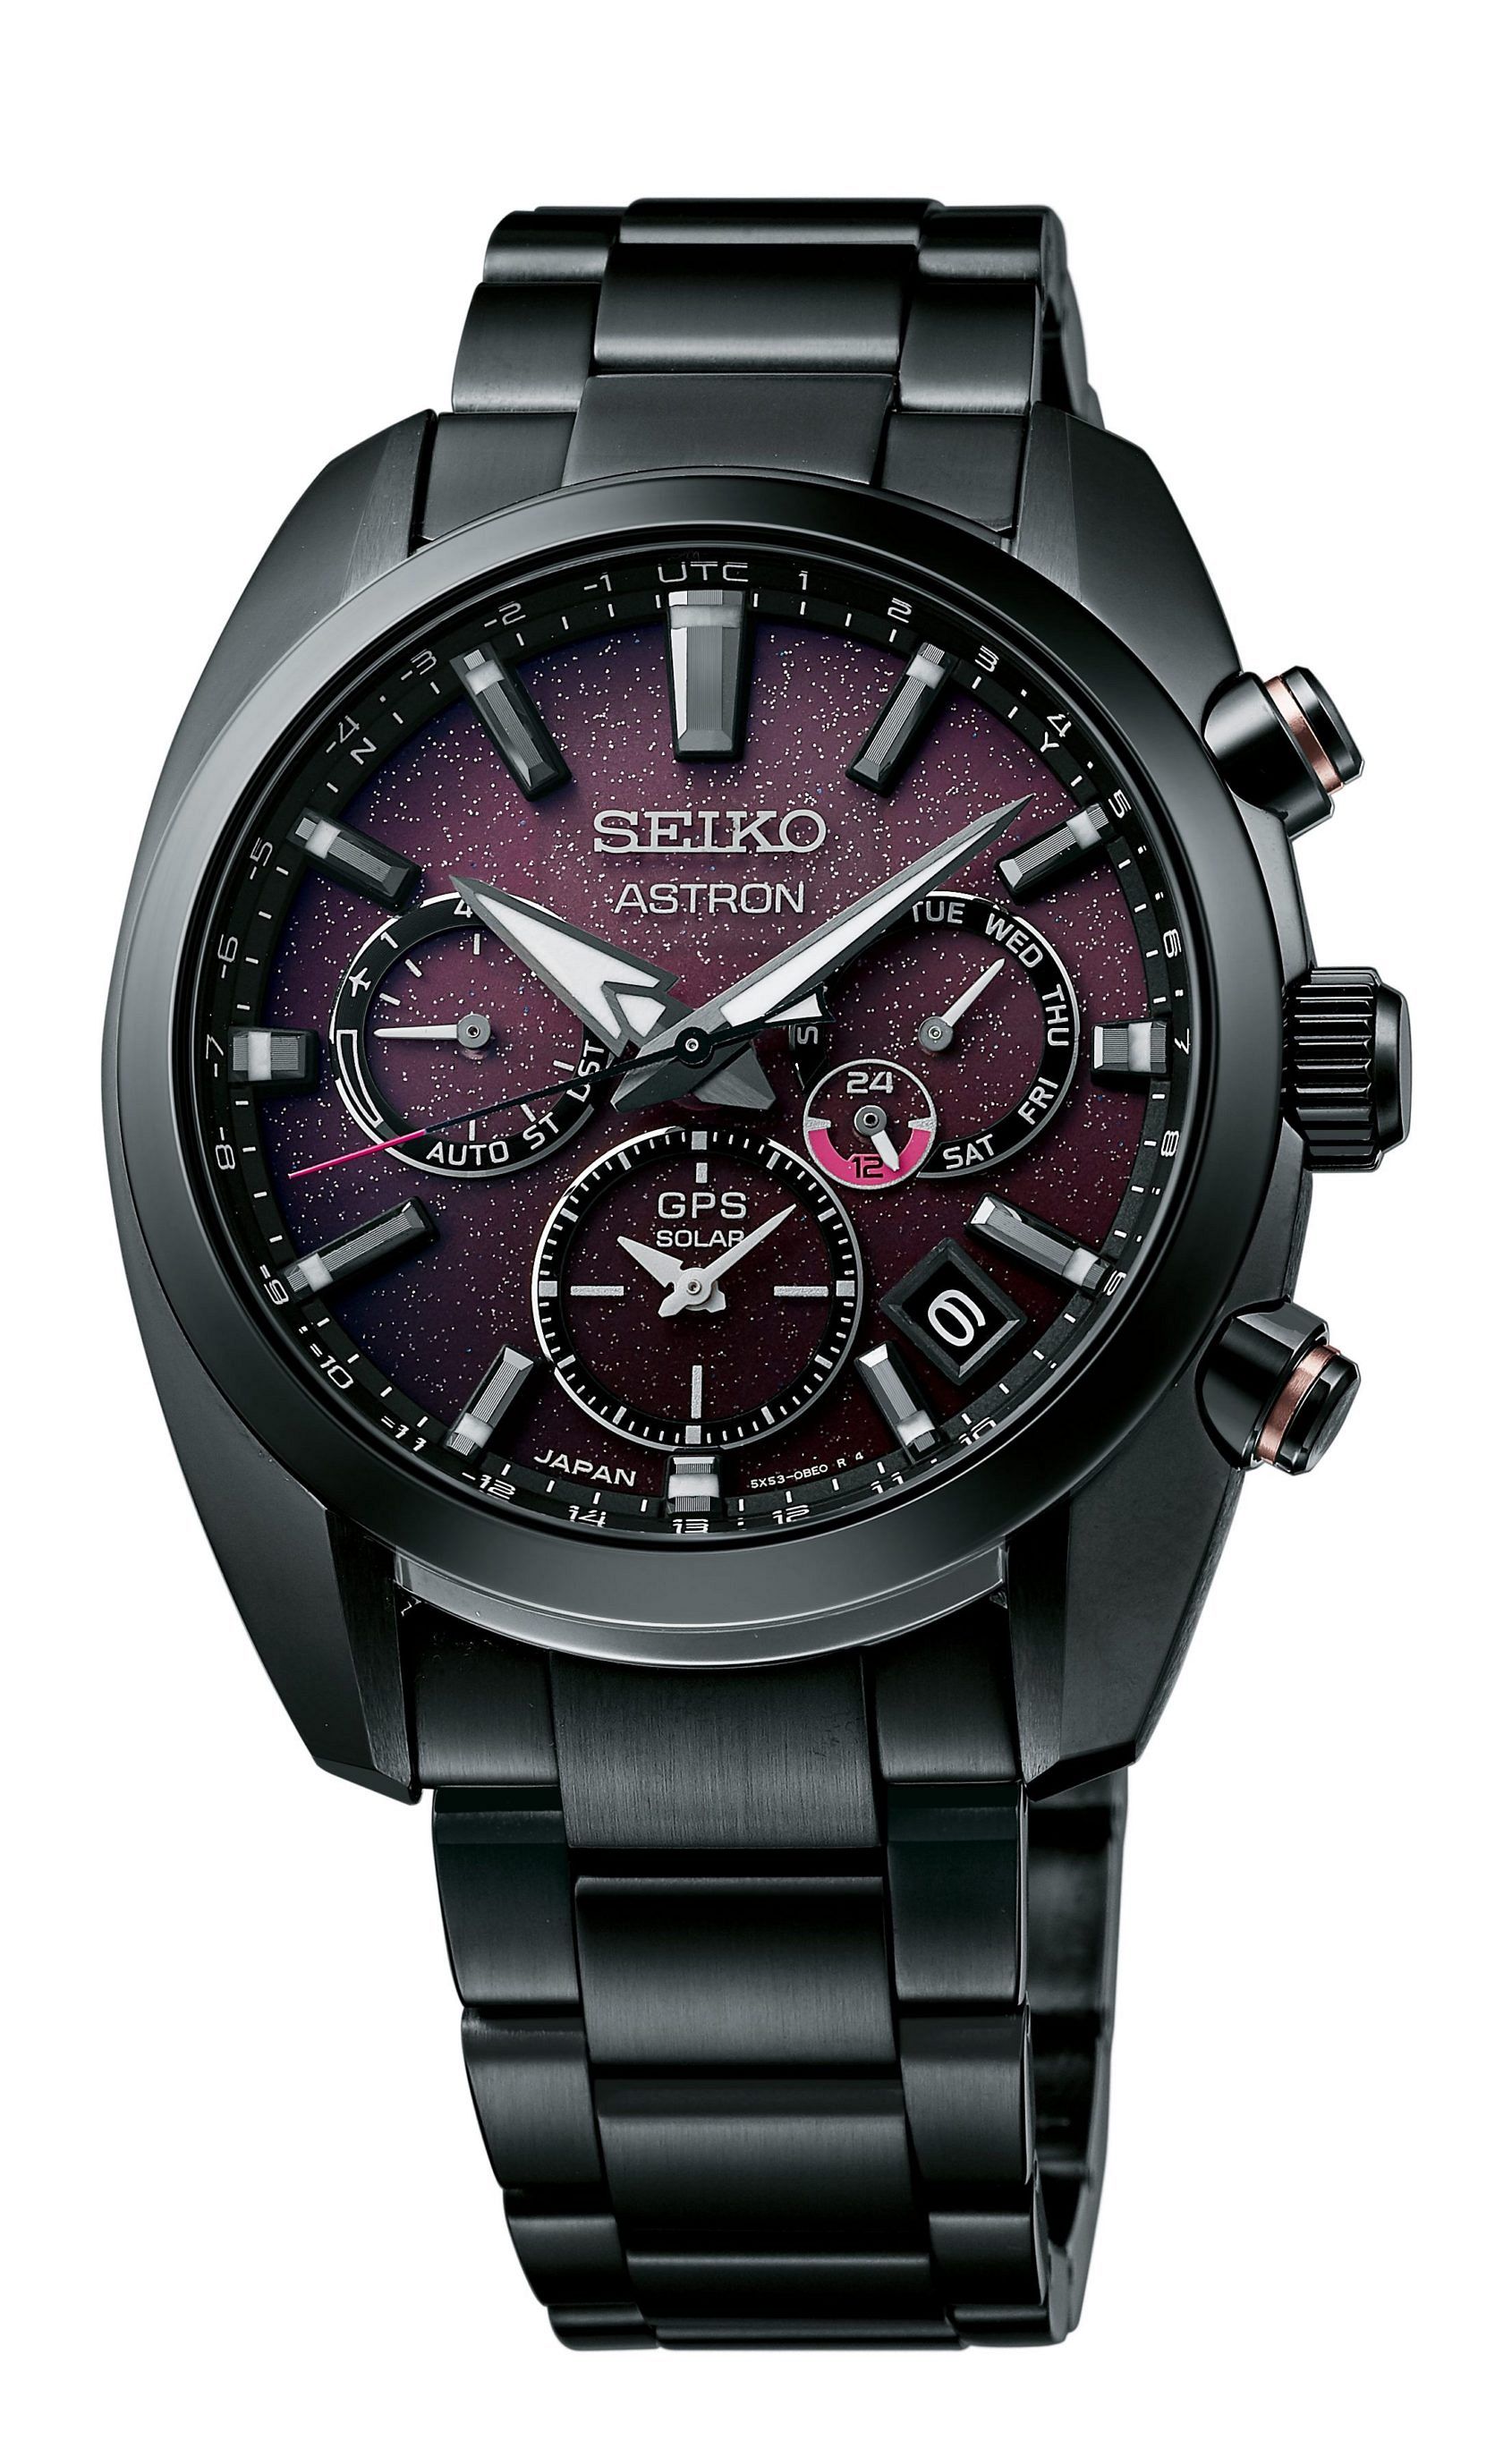 INTRODUCING: the Seiko SSH083 and SPB205 with blackened cases